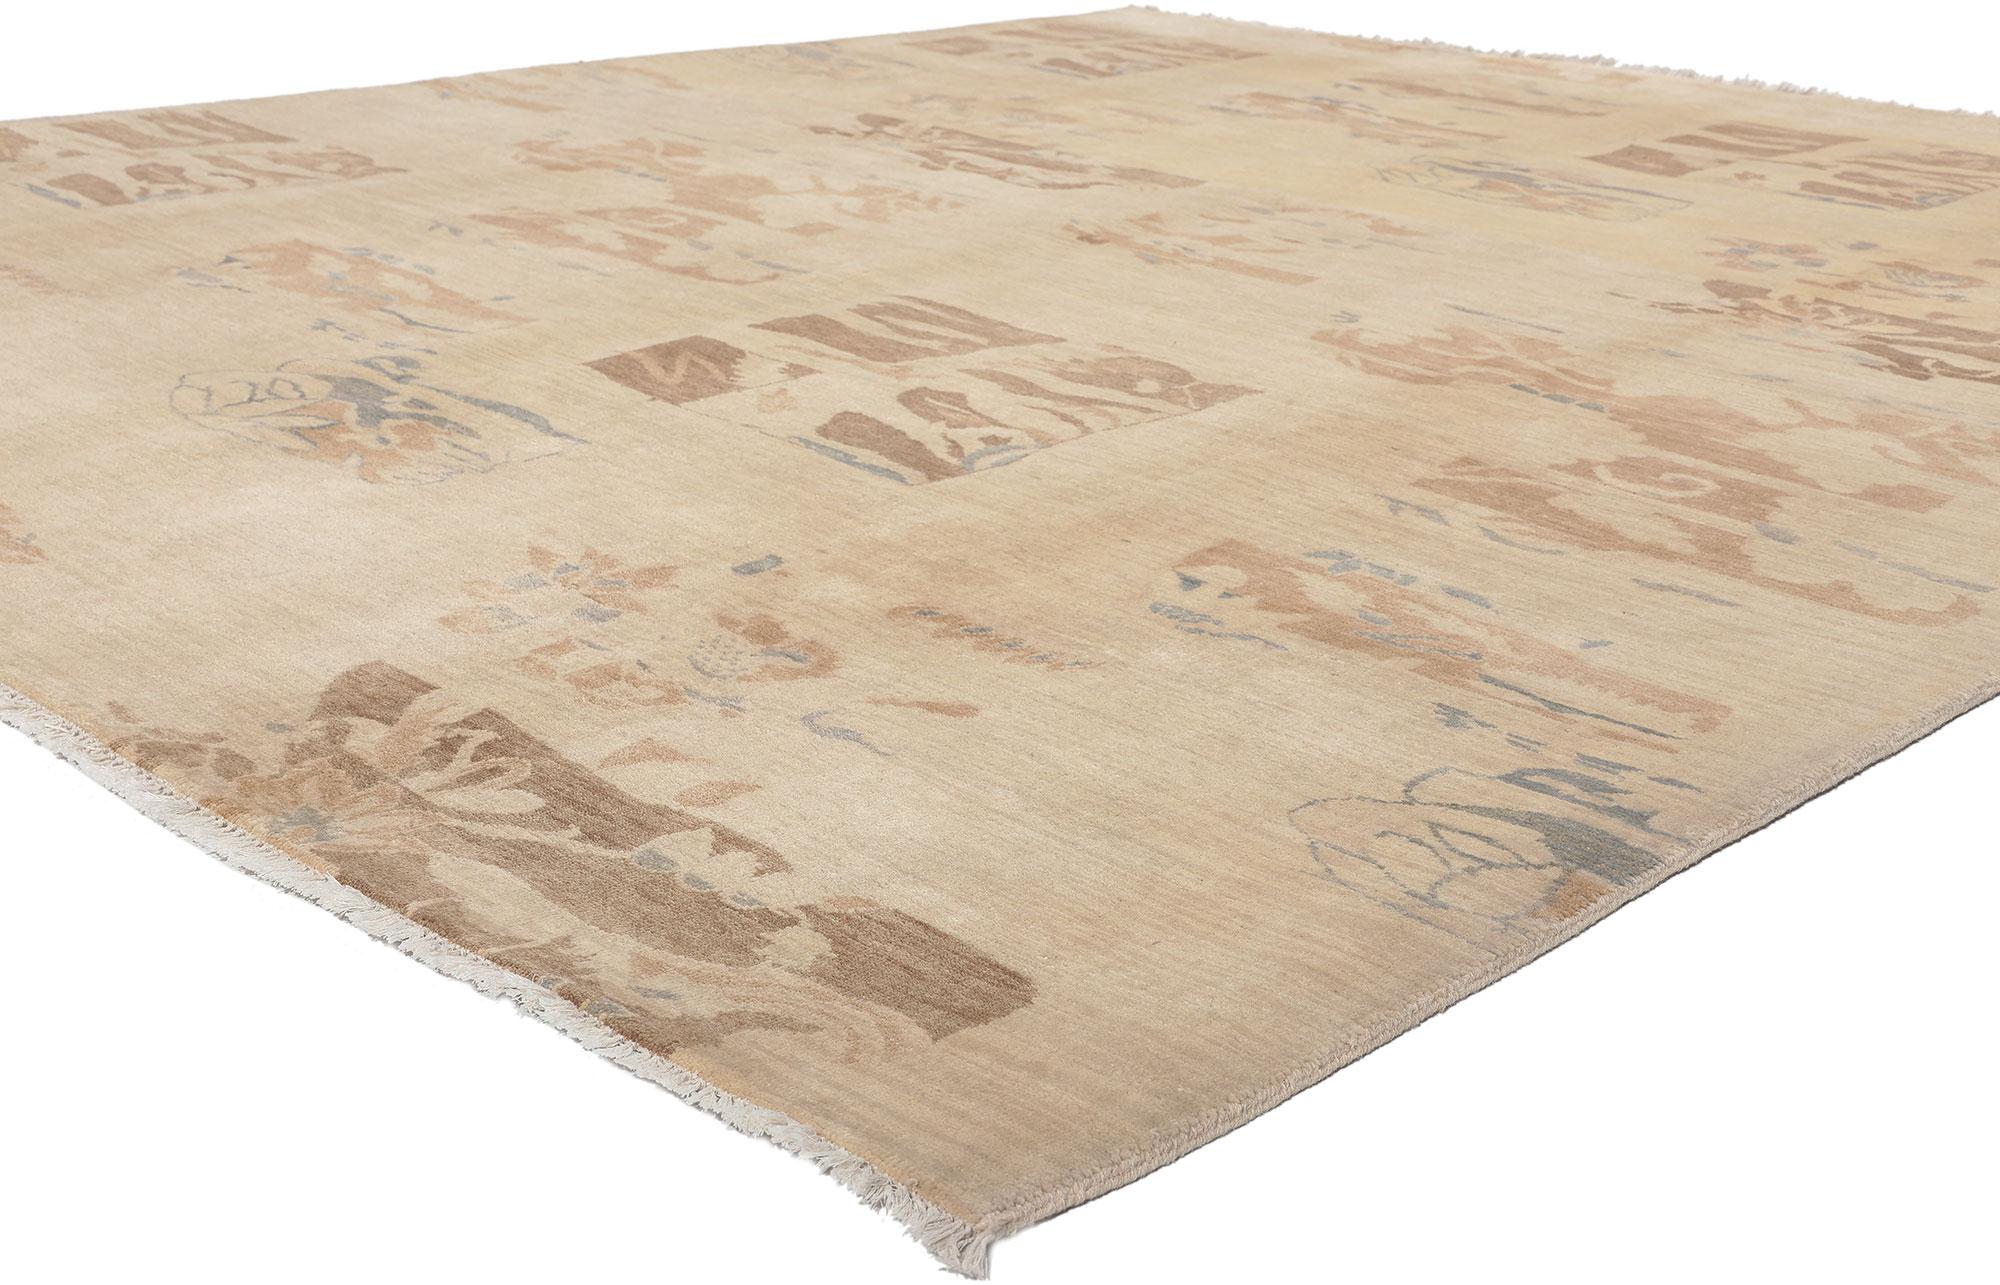 30304 Transitional Area Rug, 08'00 x 09'09.
Abstract Expressionist style meets Biophilic Design in this hand knotted wool transitional area rug. The elusive design and earthy colorway woven into this piece work together creating an intriguing